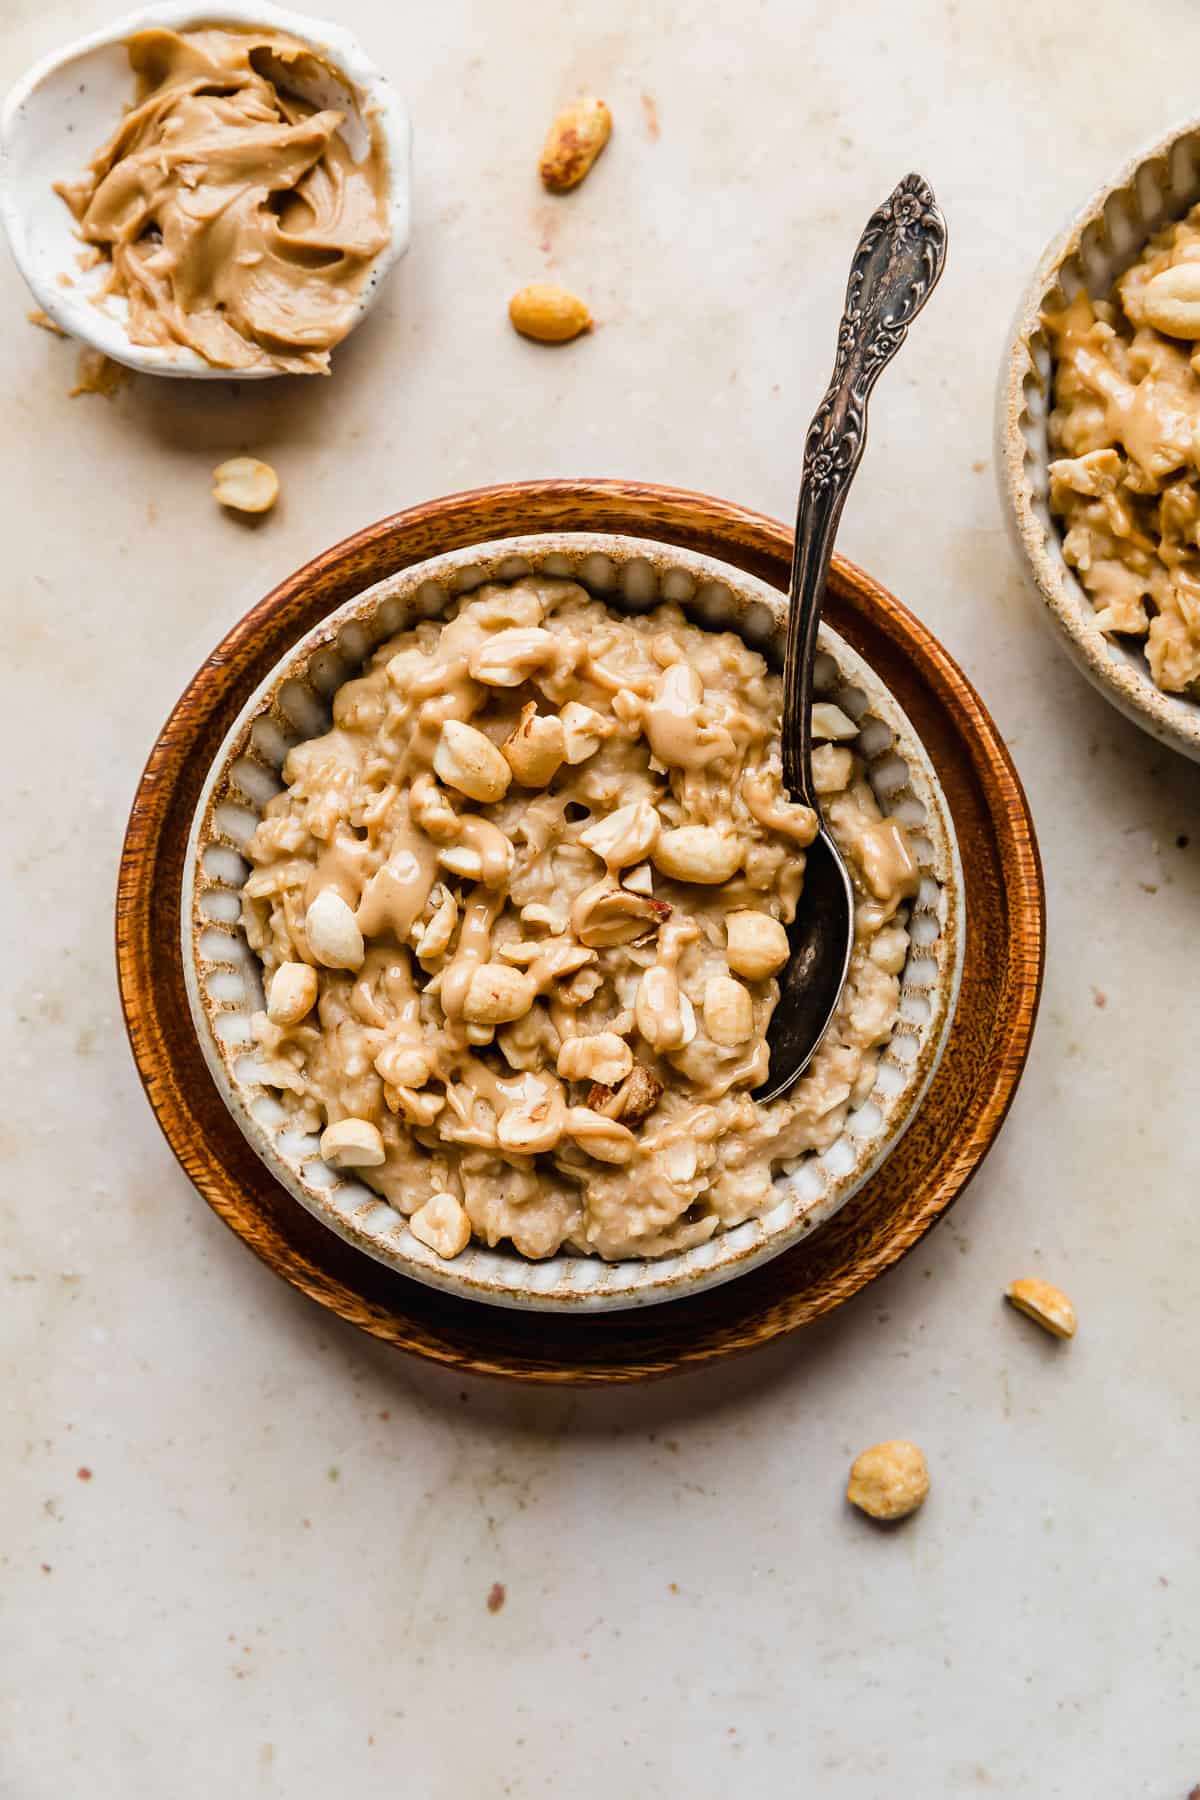 Peanut Butter Oatmeal in a ceramic bowl topped with drizzled peanut butter and chopped peanuts.